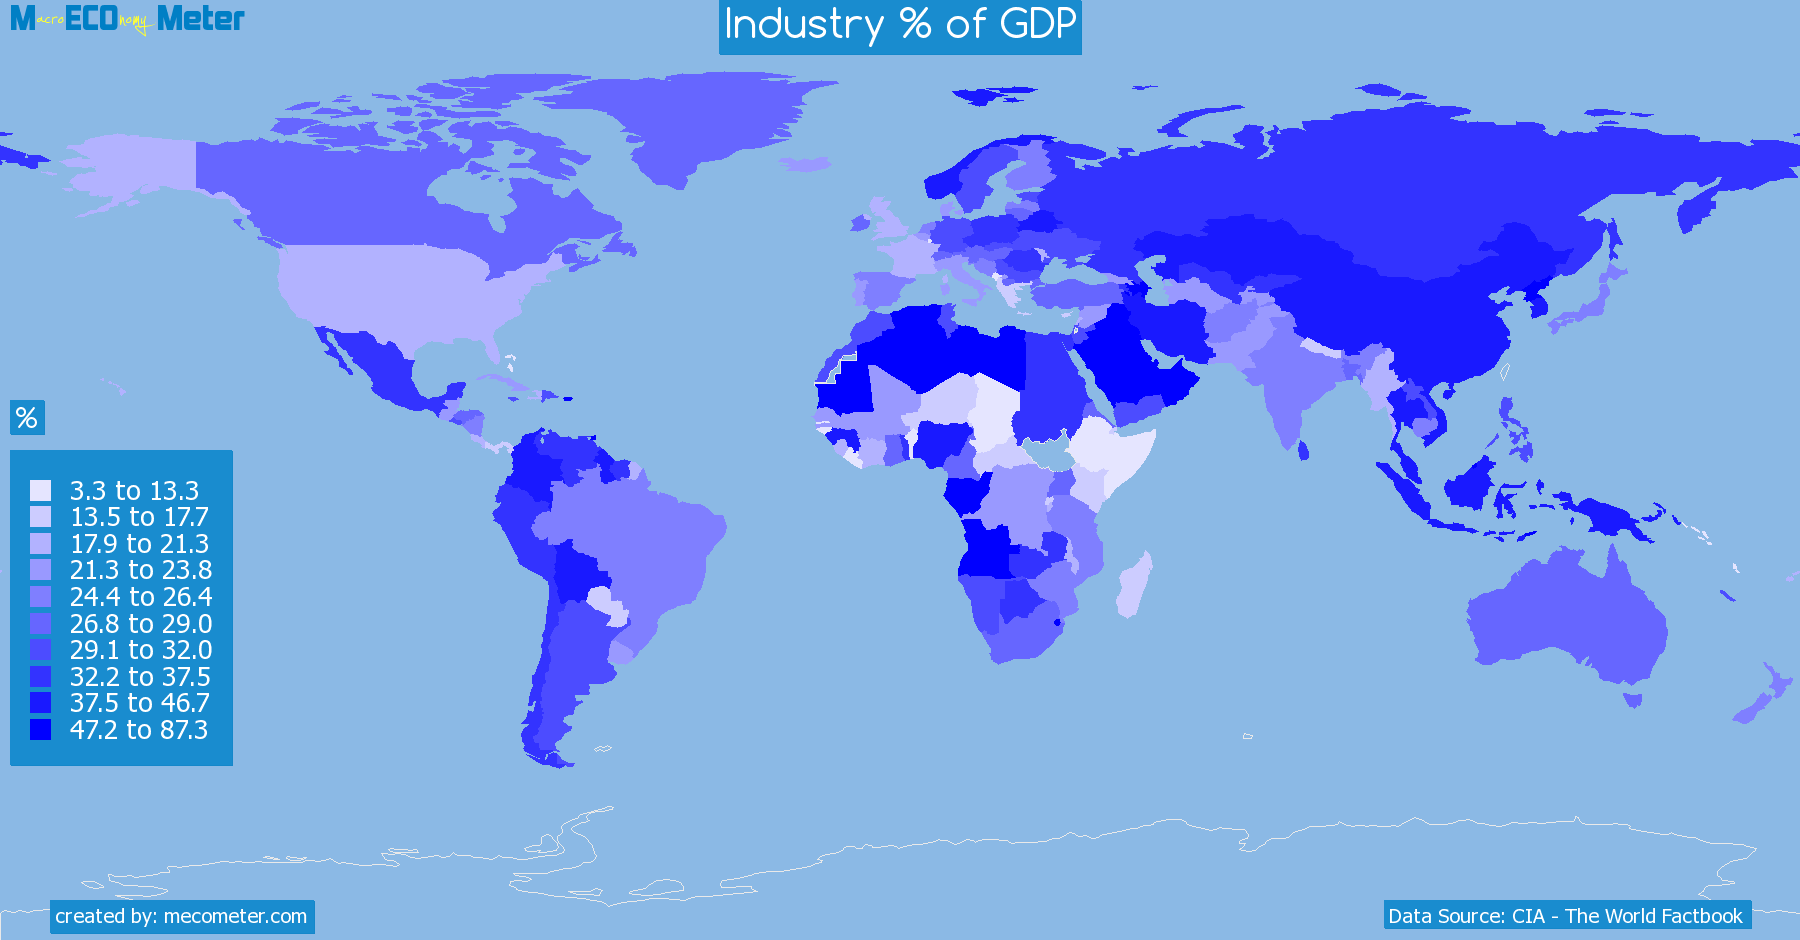 Industry % of GDP